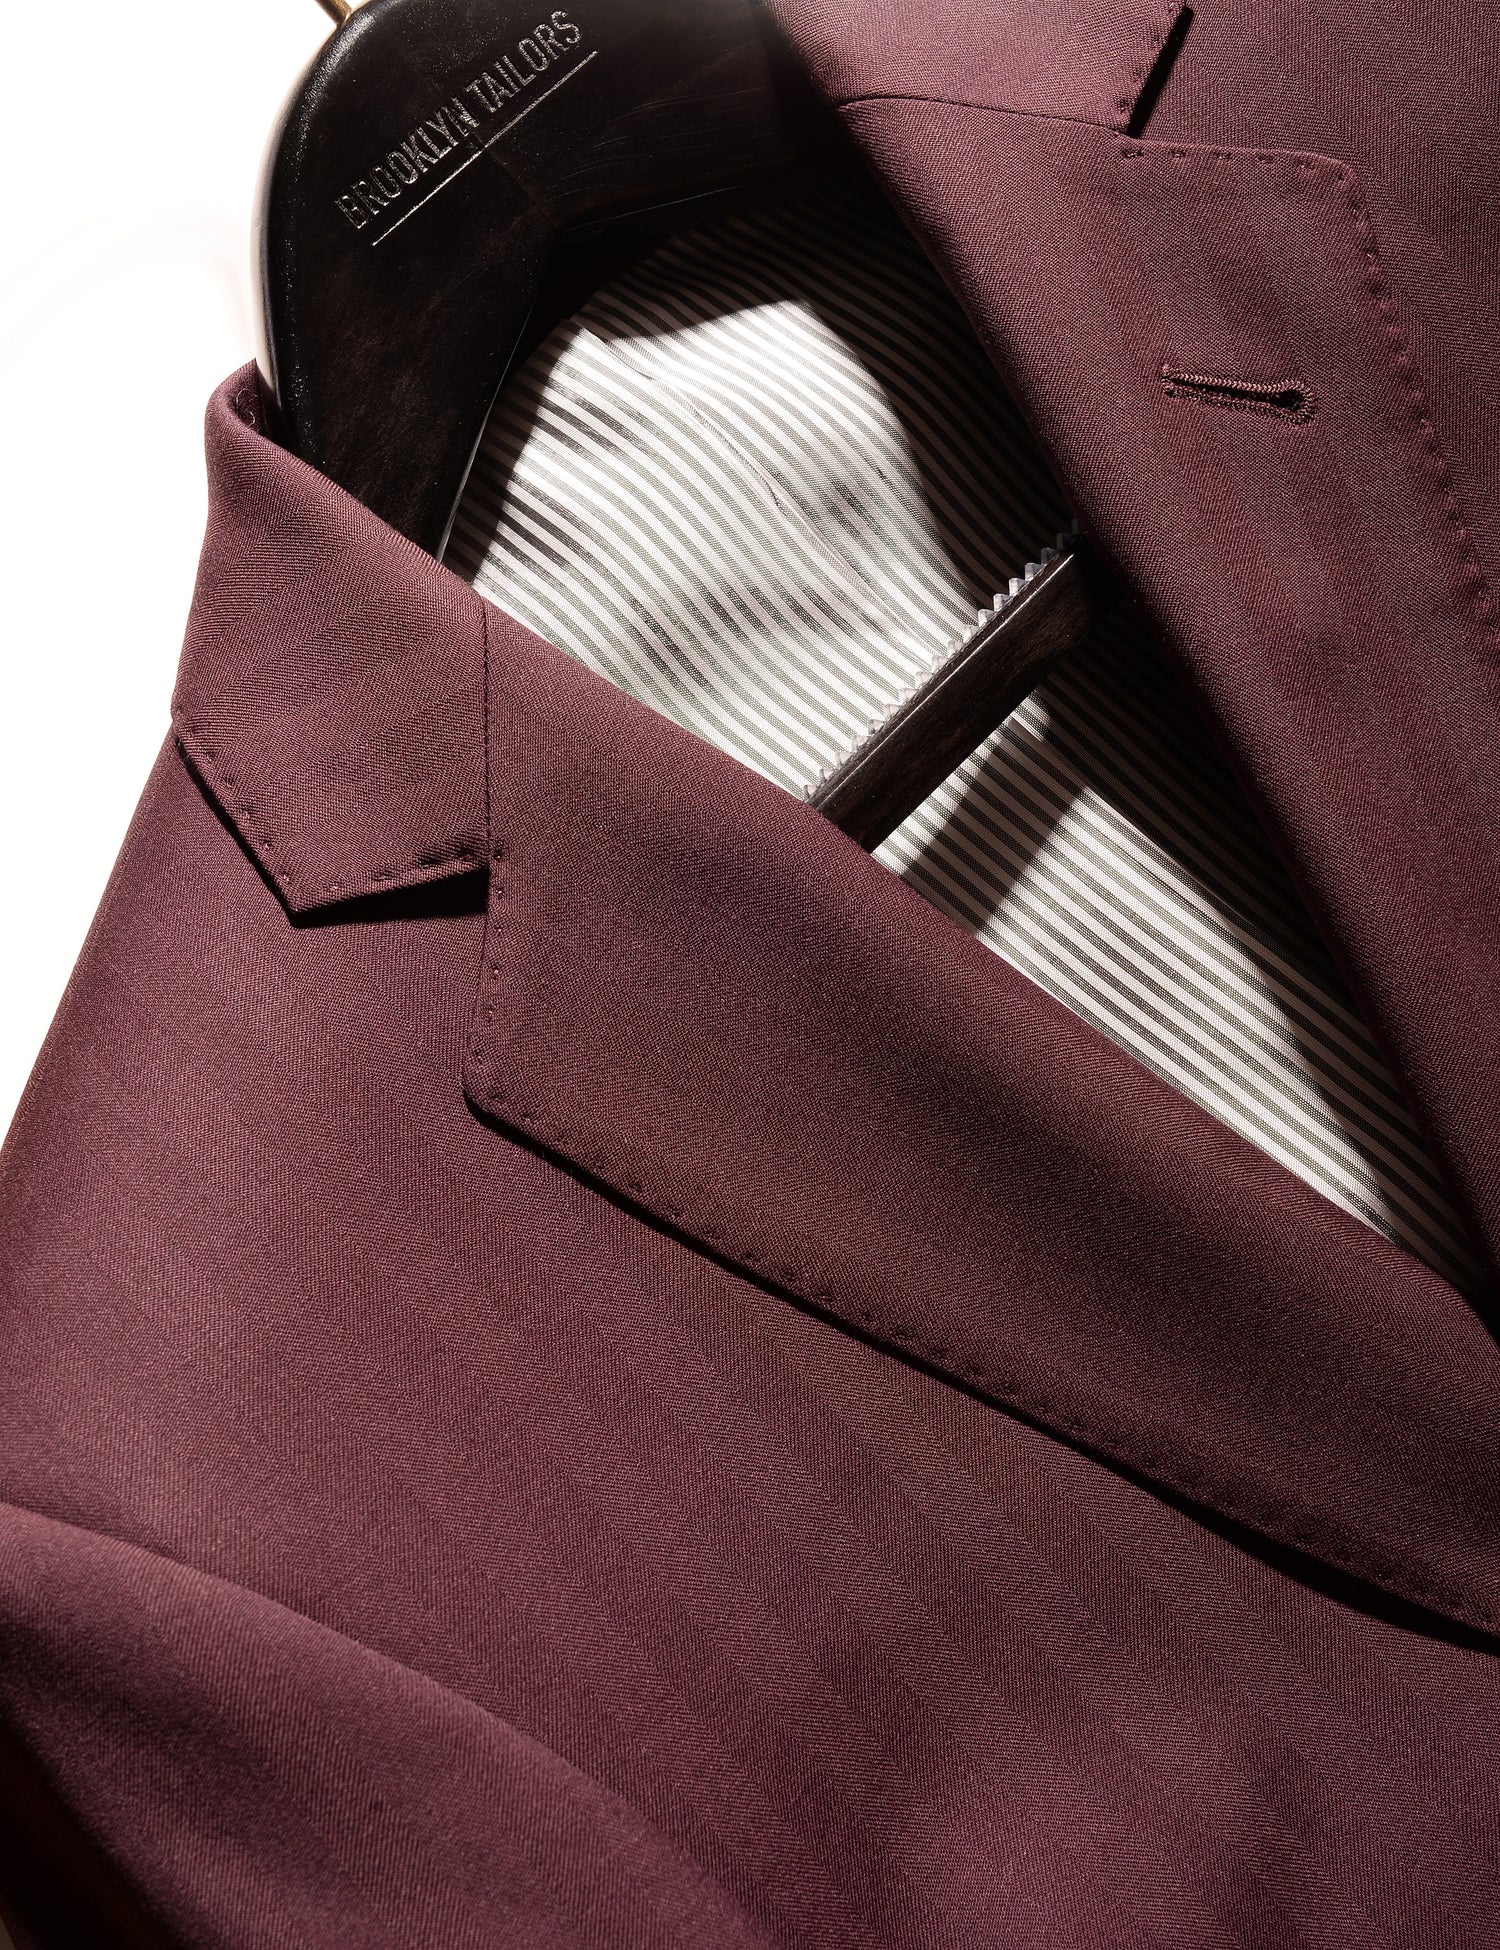 Detail shot of Brooklyn Tailors BKT50 Tailored Jacket in Wool Herringbone - Syrah showing lapel and fabric texture